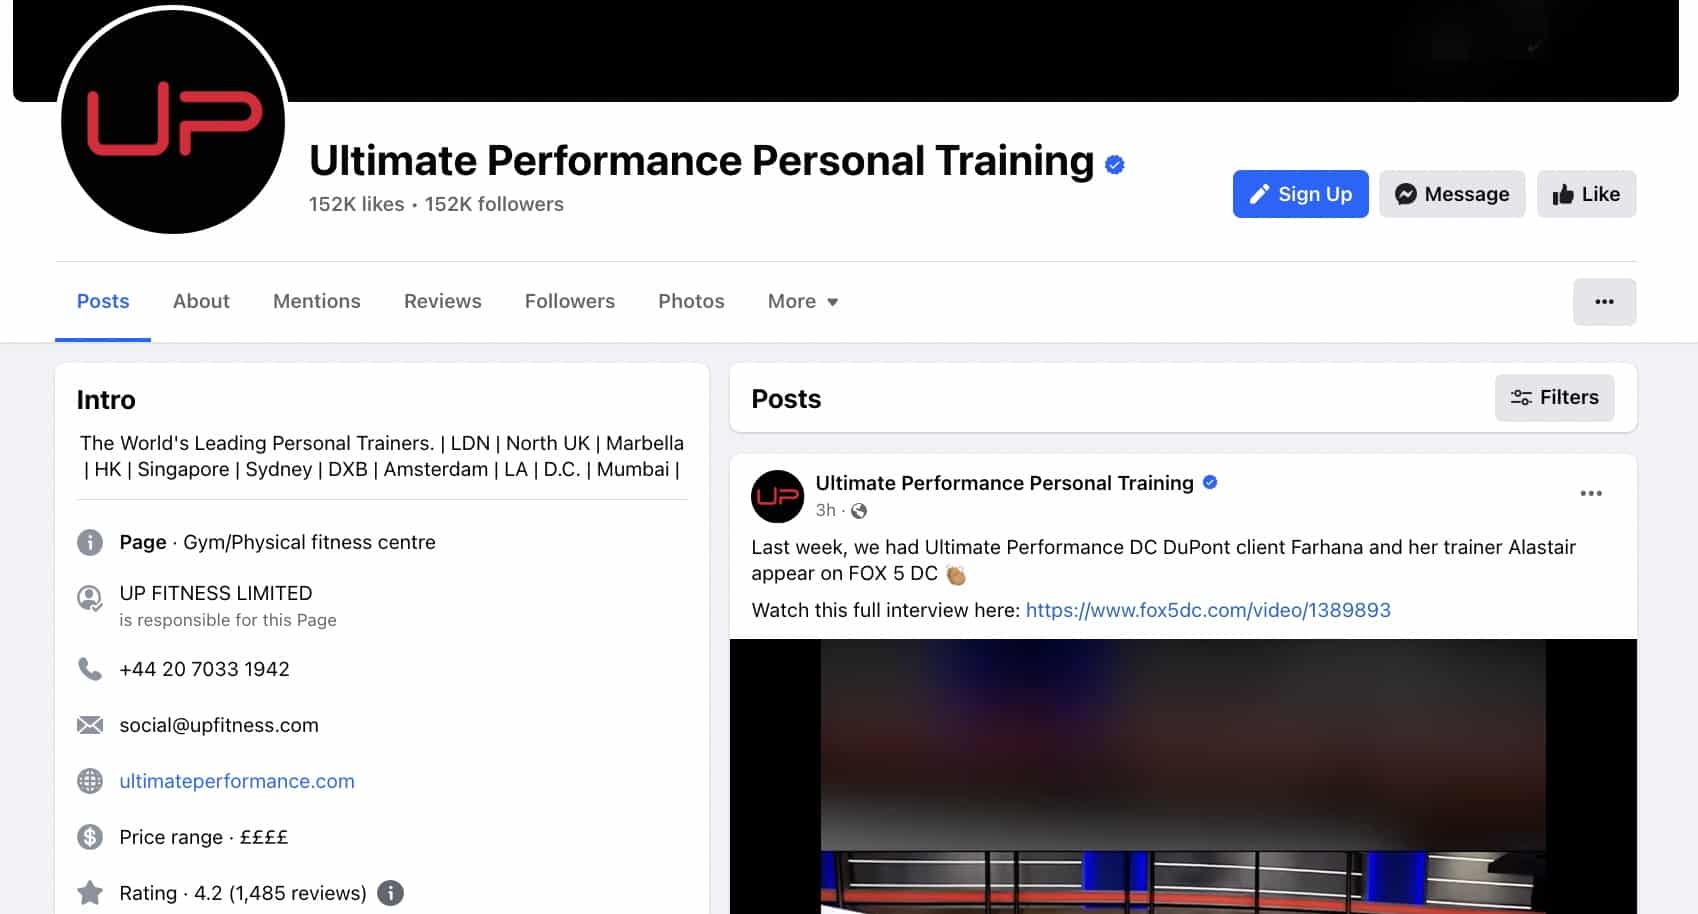 the Facebook page of the personal training company Ultimate Performance